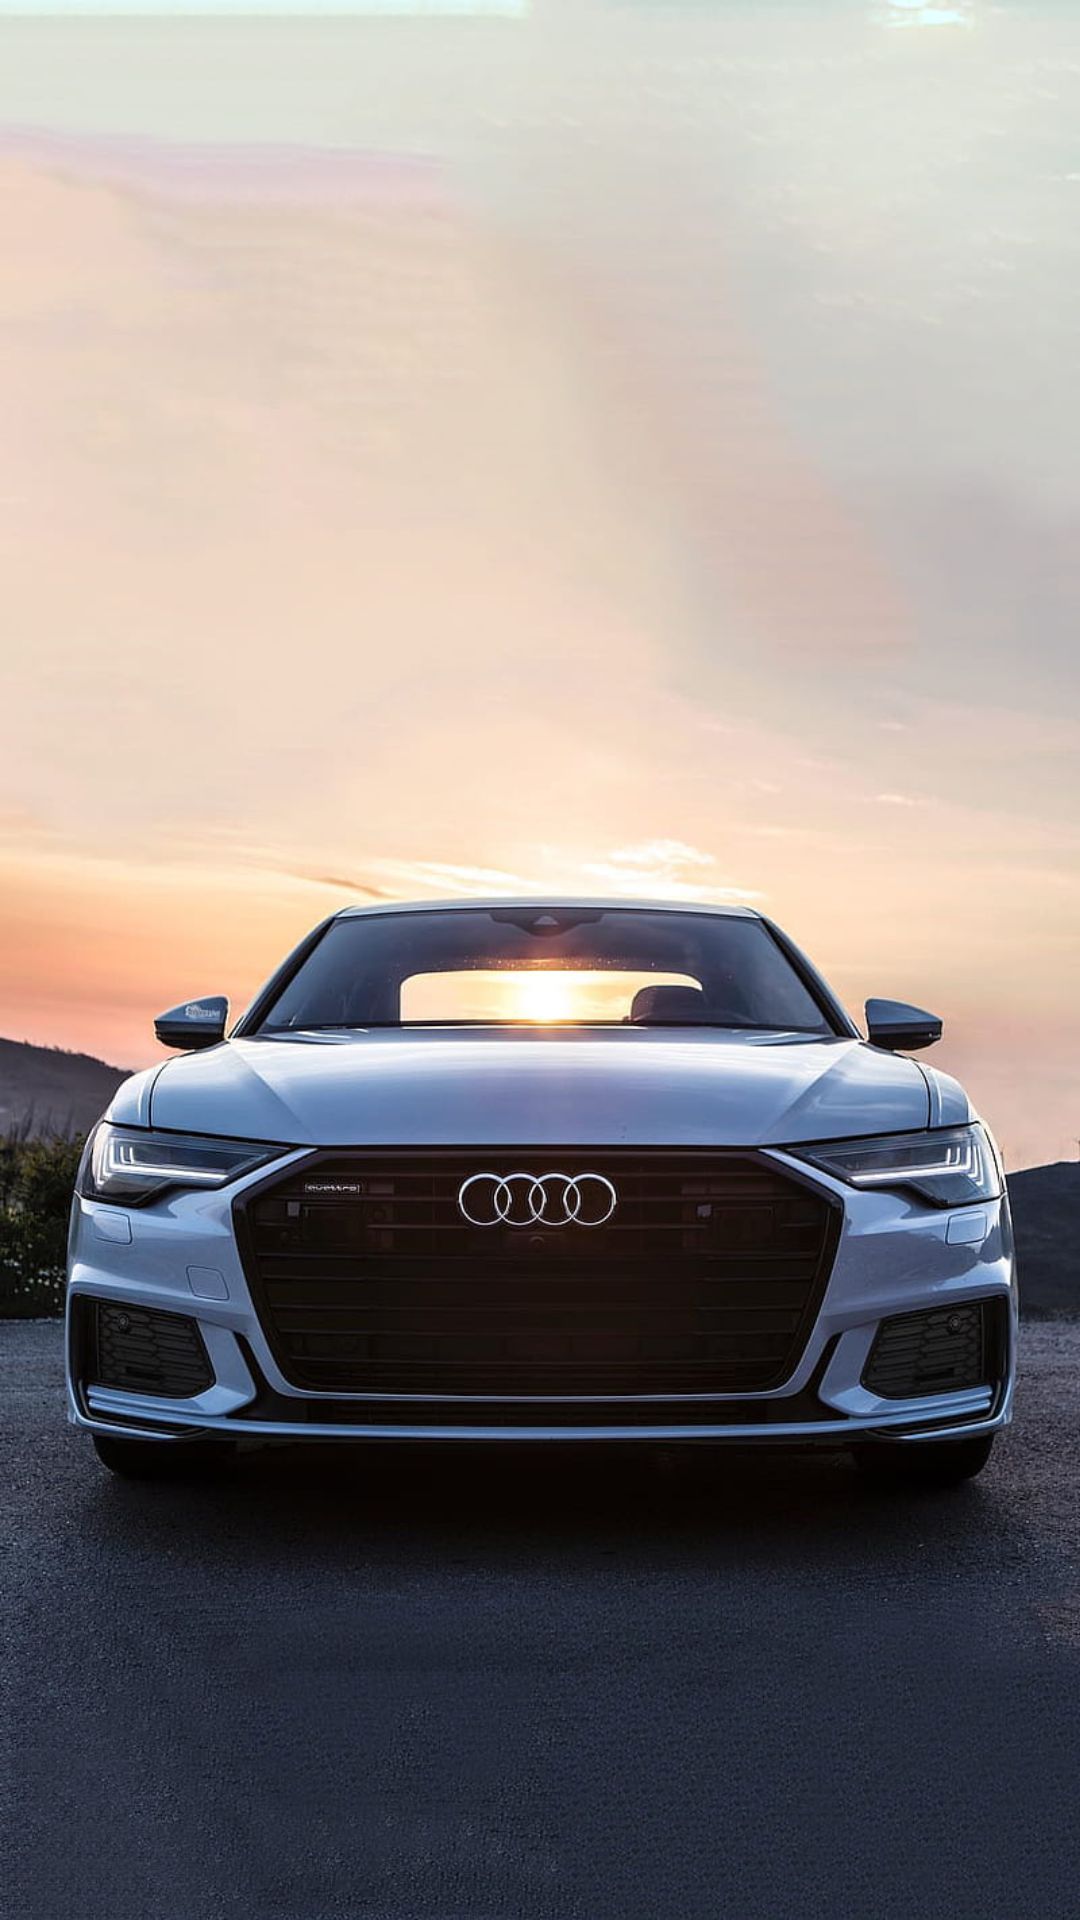 Audi A6 Wallpaper 4k For iPhone